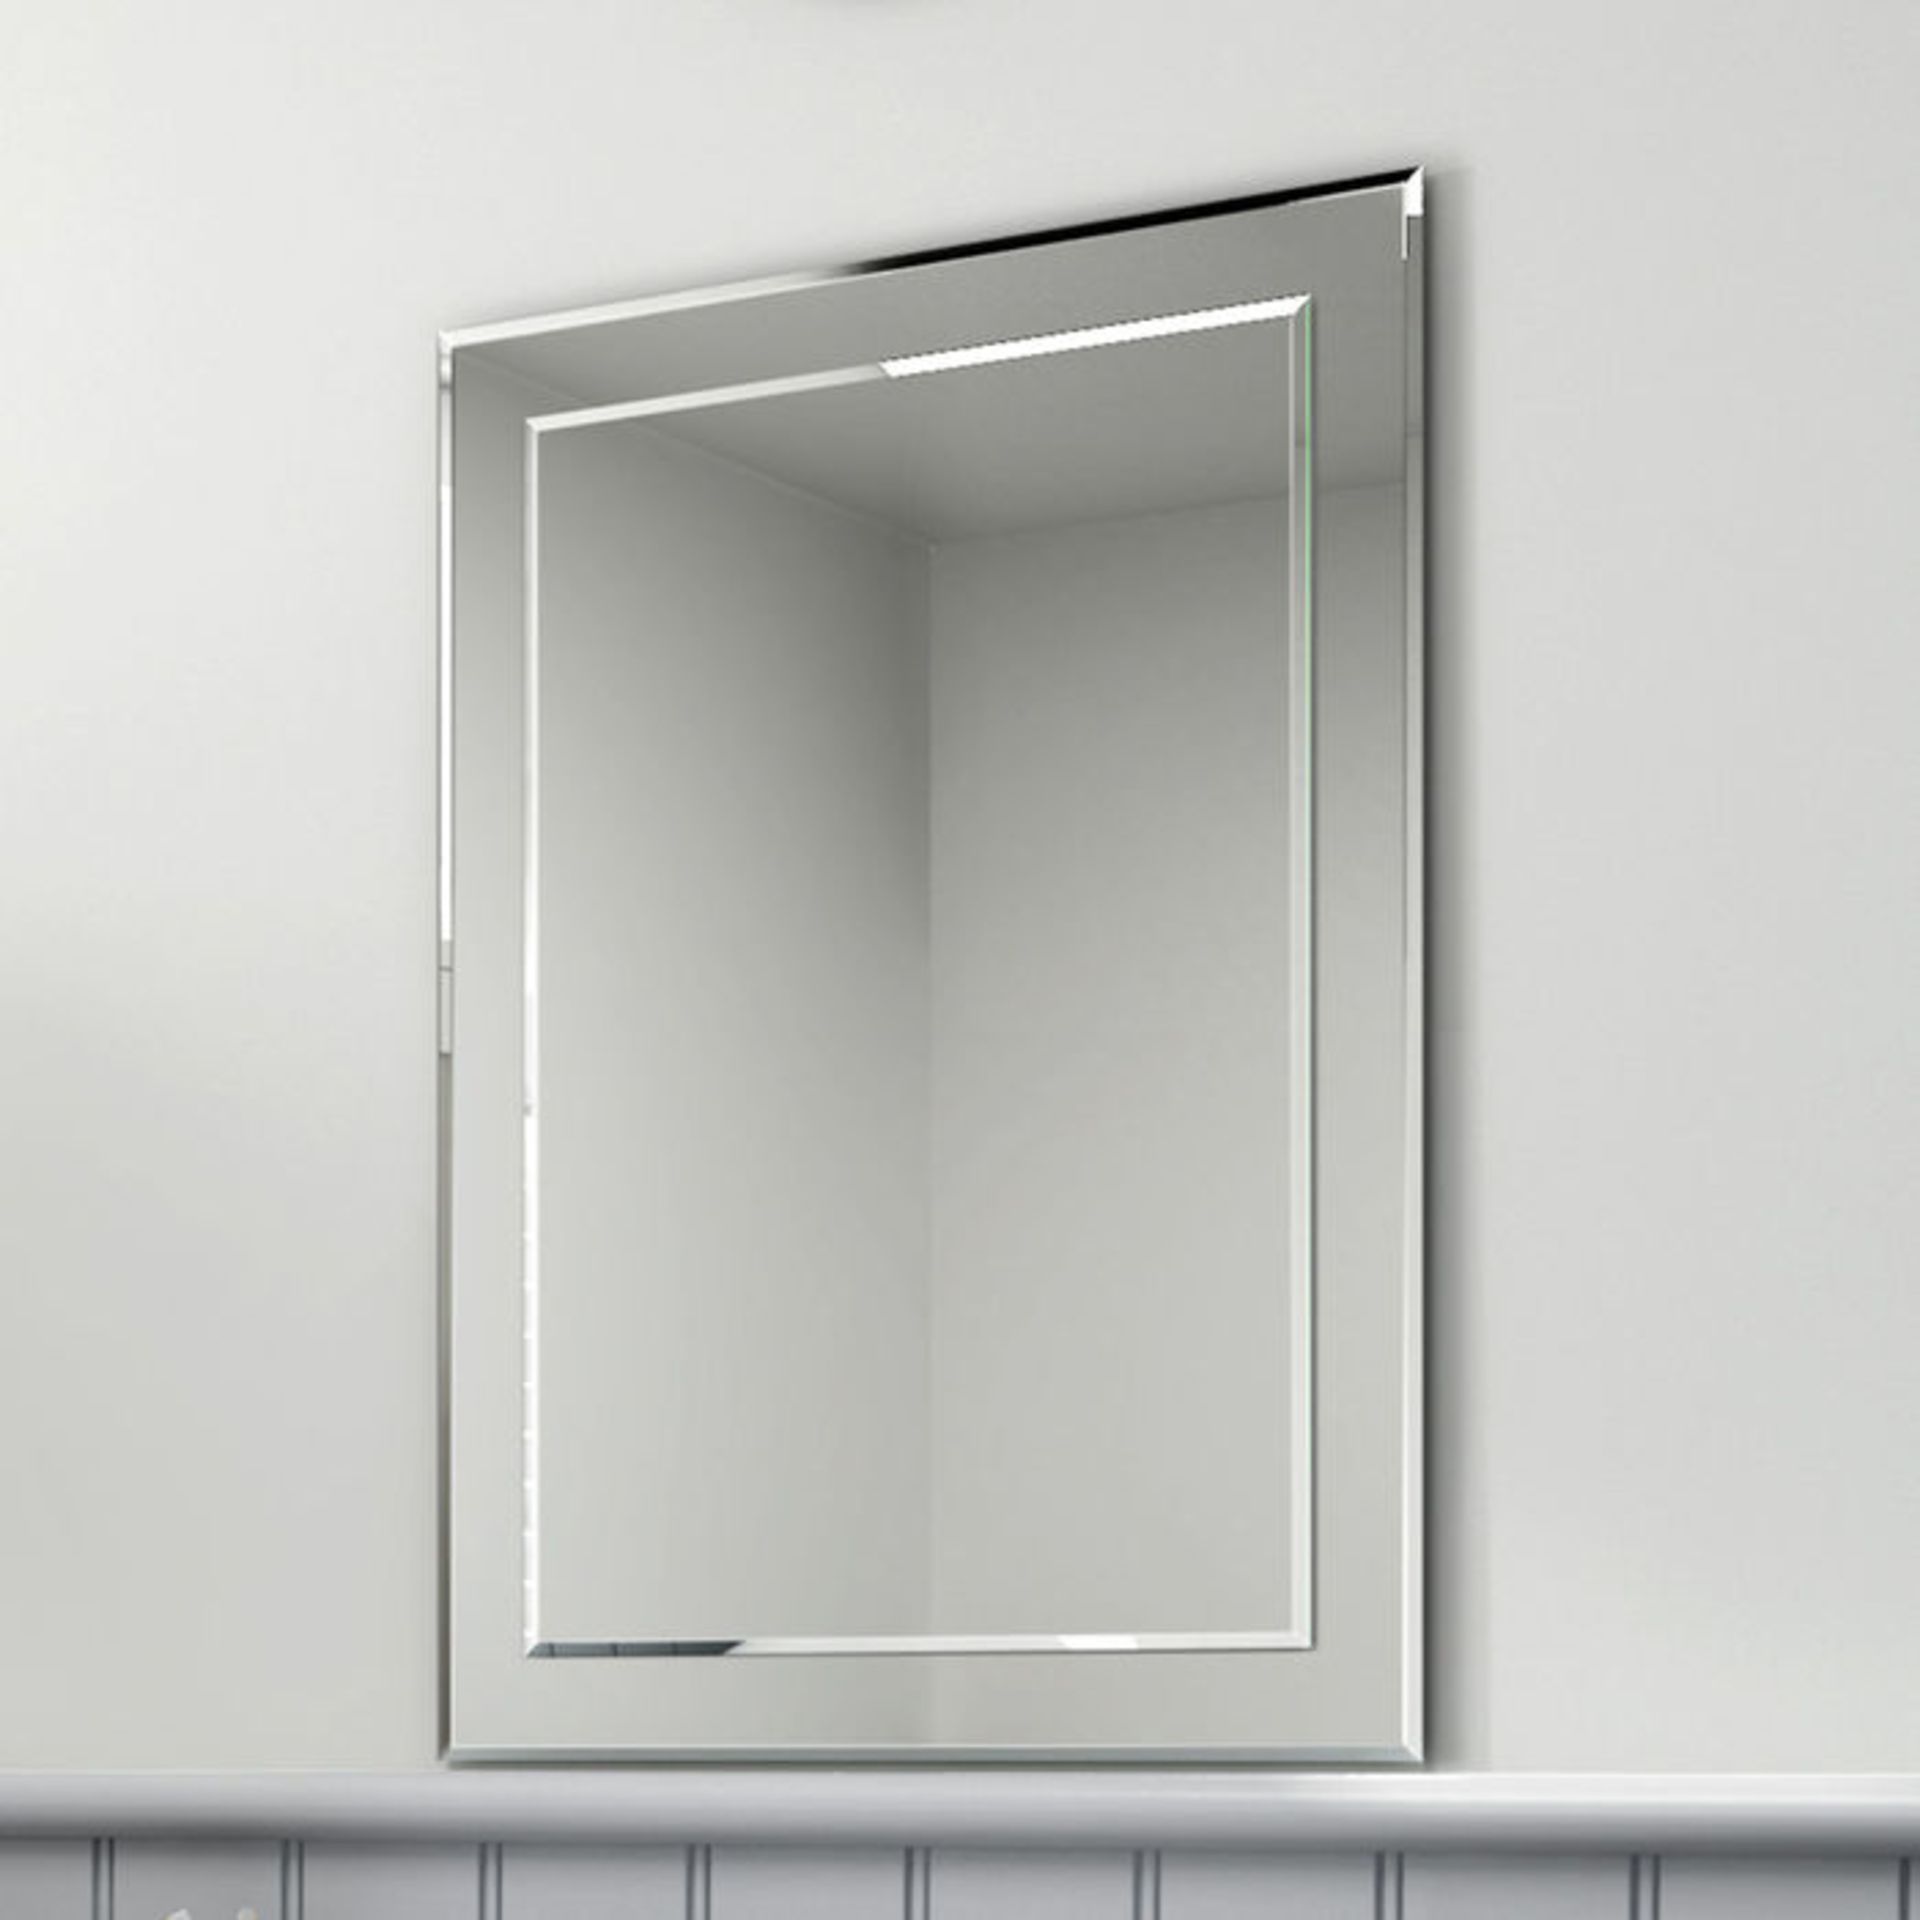 (GR112) 500x700mm Bevel Mirror. Smooth beveled edge for additional safety and style Supplied fully